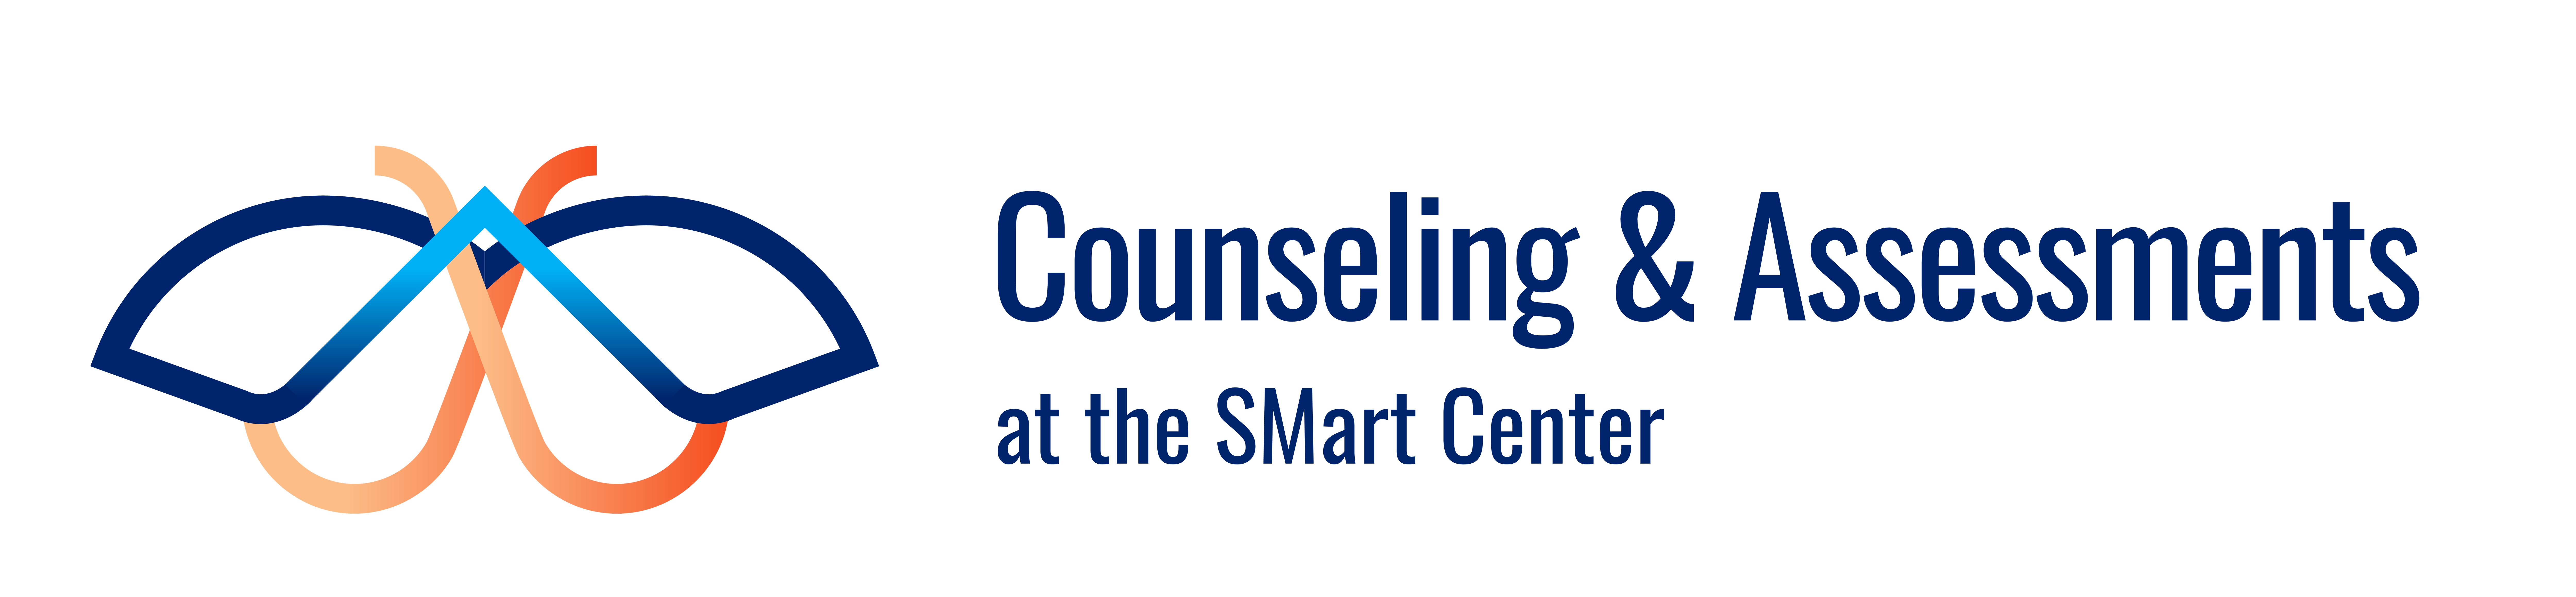 Counseling & Assessments, at the SMart Center